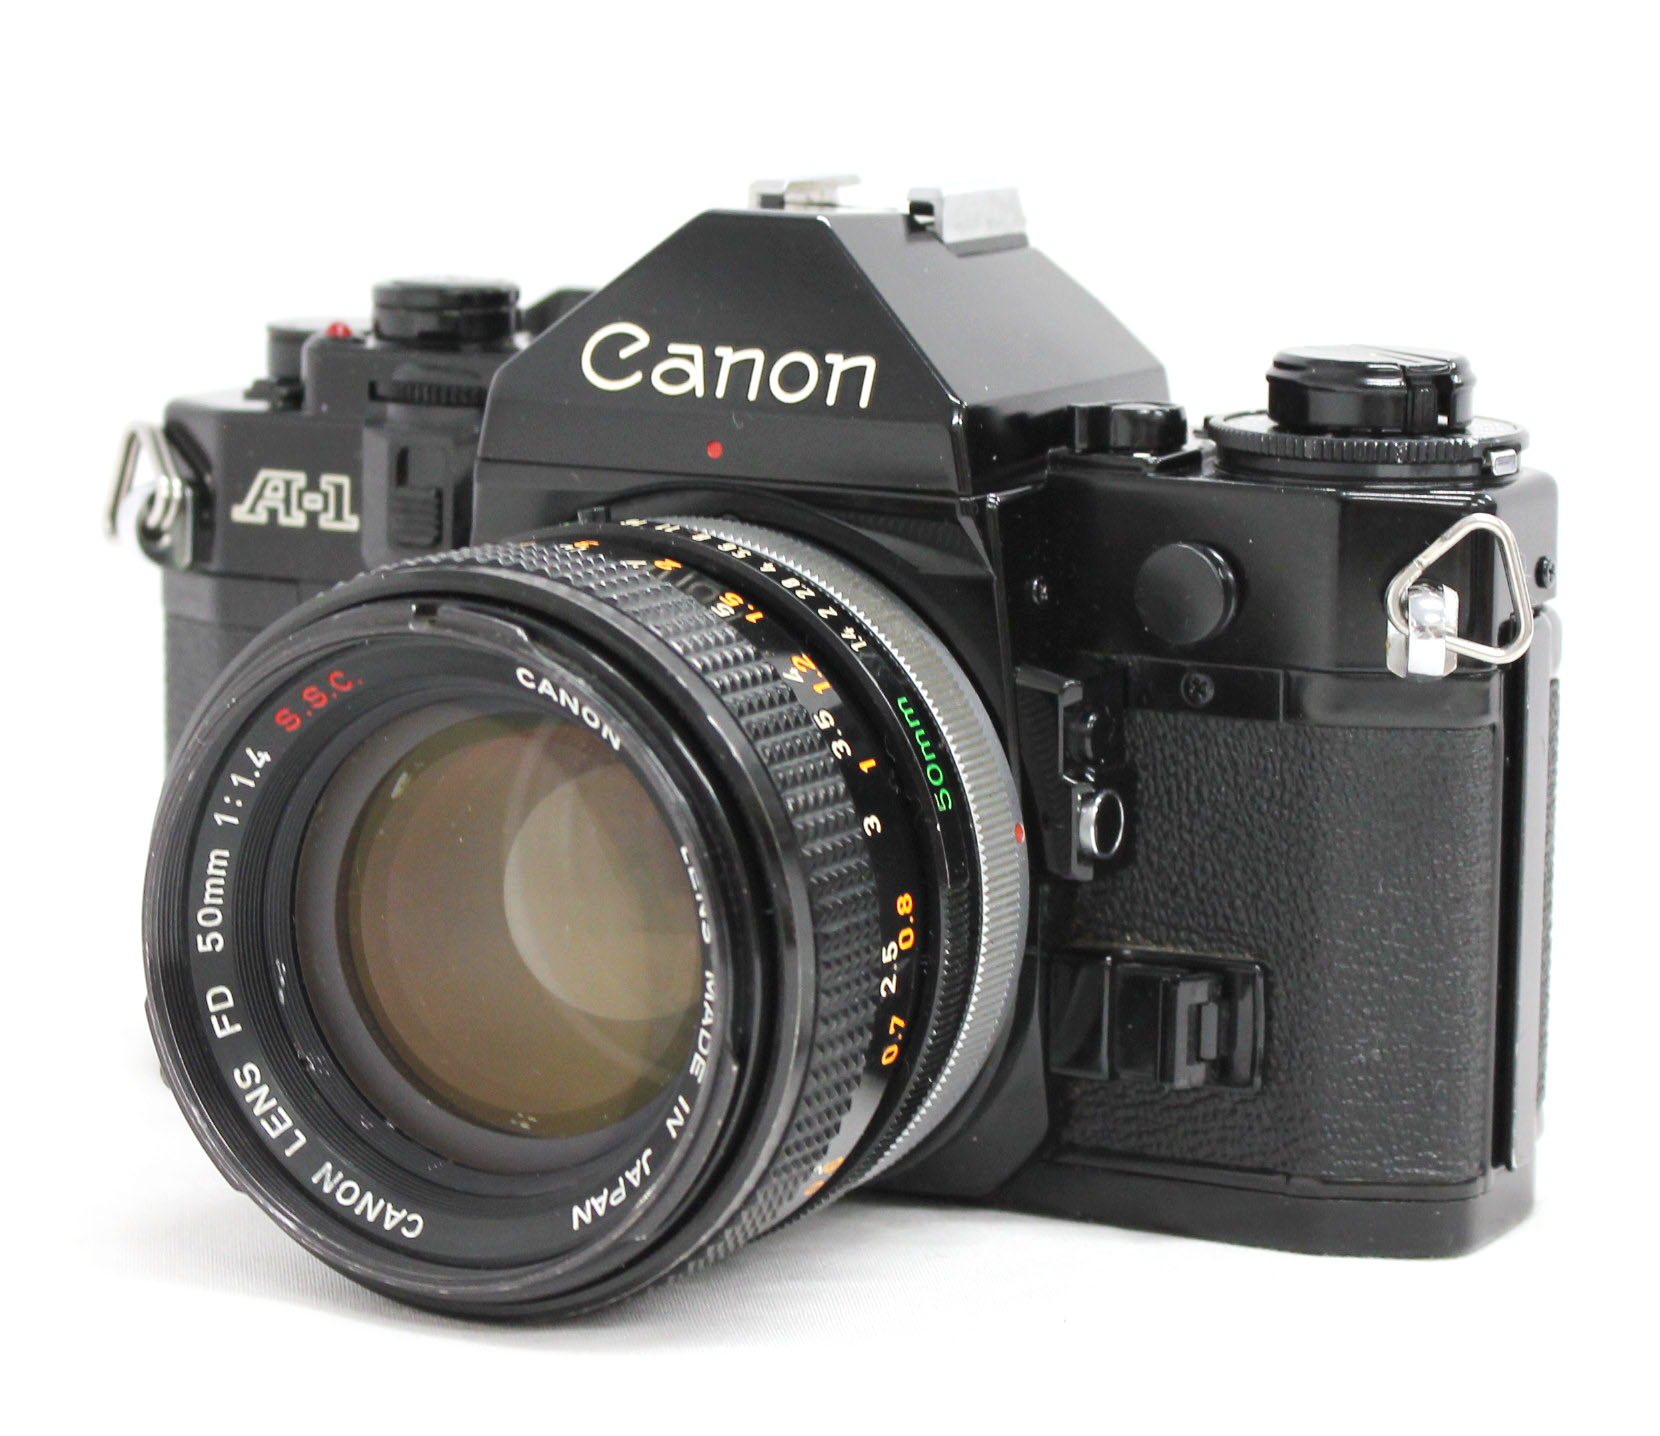 [Excellent++++] Canon A-1 35mm SLR Film Camera with FD 50mm F/1.4 S.S.C. Lens from Japan